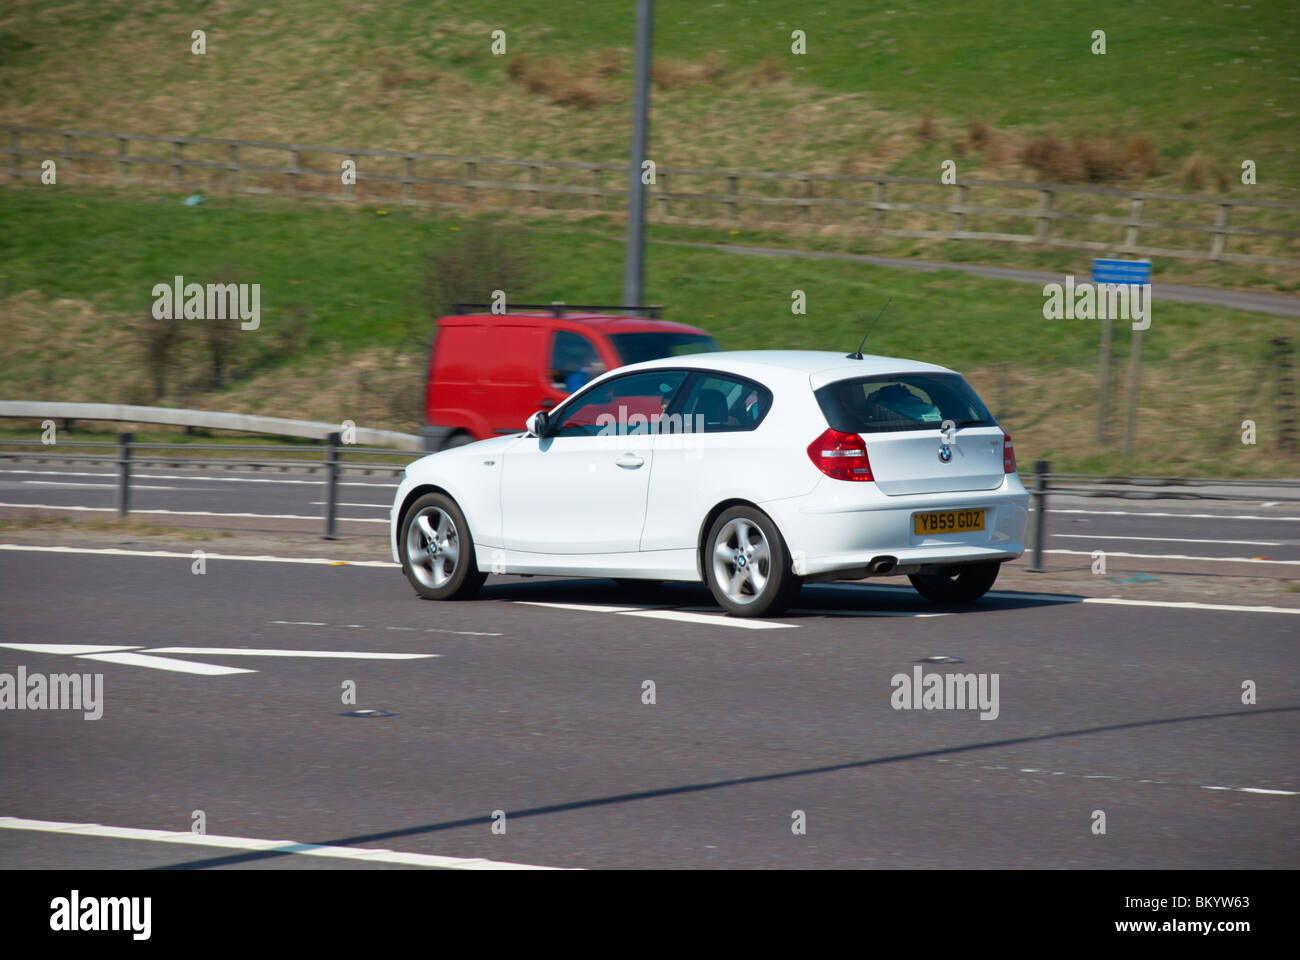 BMW car on the M62. Stock Photo